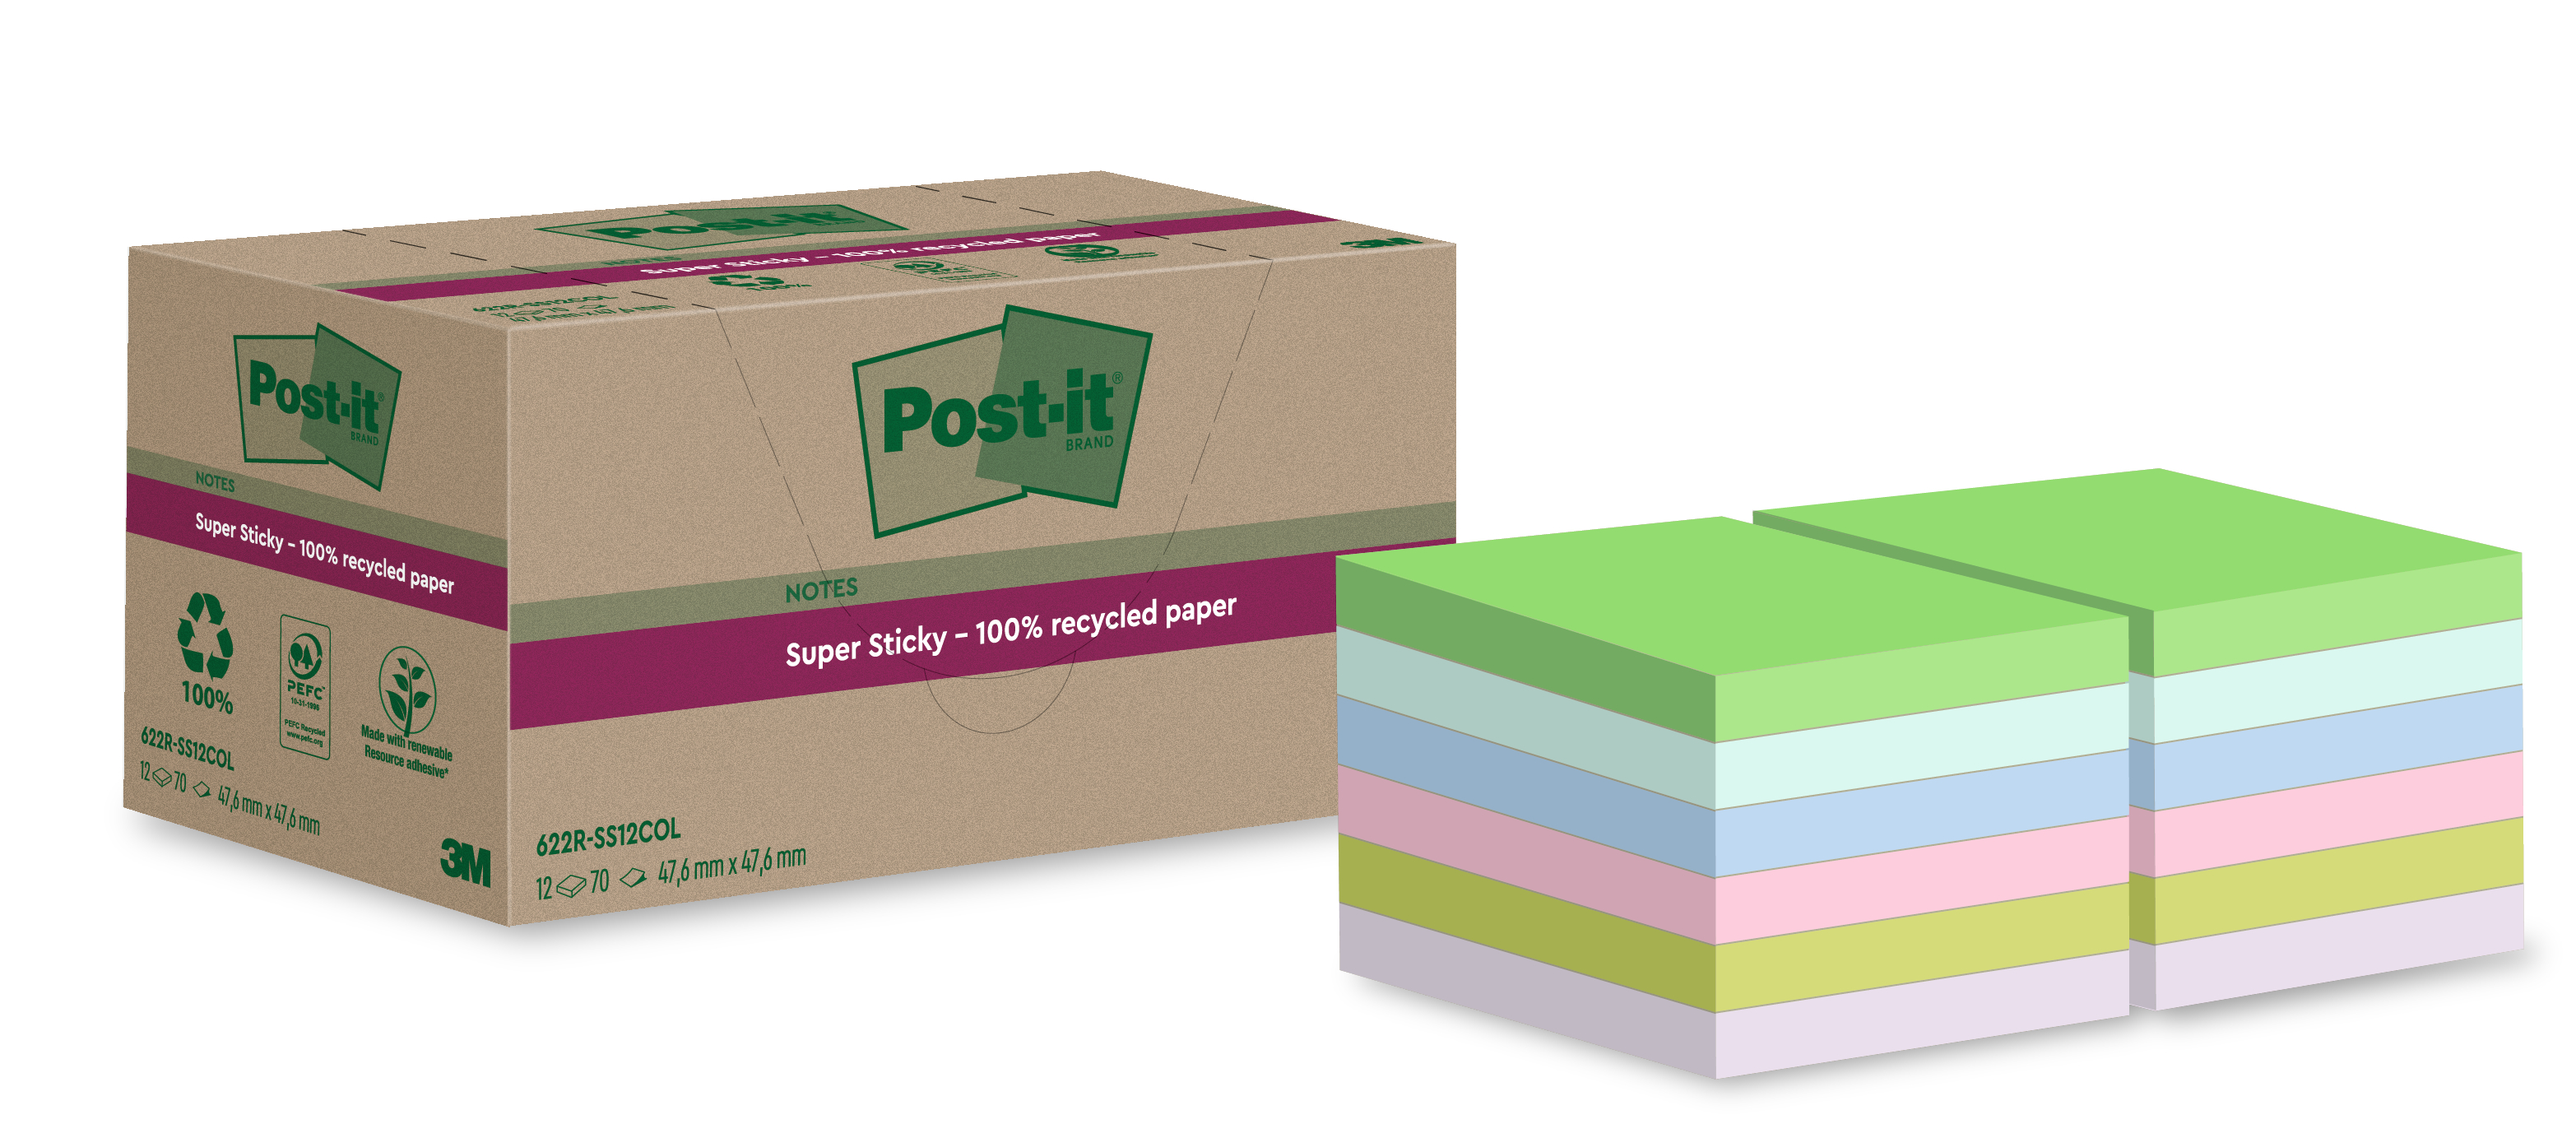 POST-IT SuperSticky Notes 47.6x47.6mm 622 RSS12COL Recycling,assort. 12x70 flls. Recycling,assort. 1